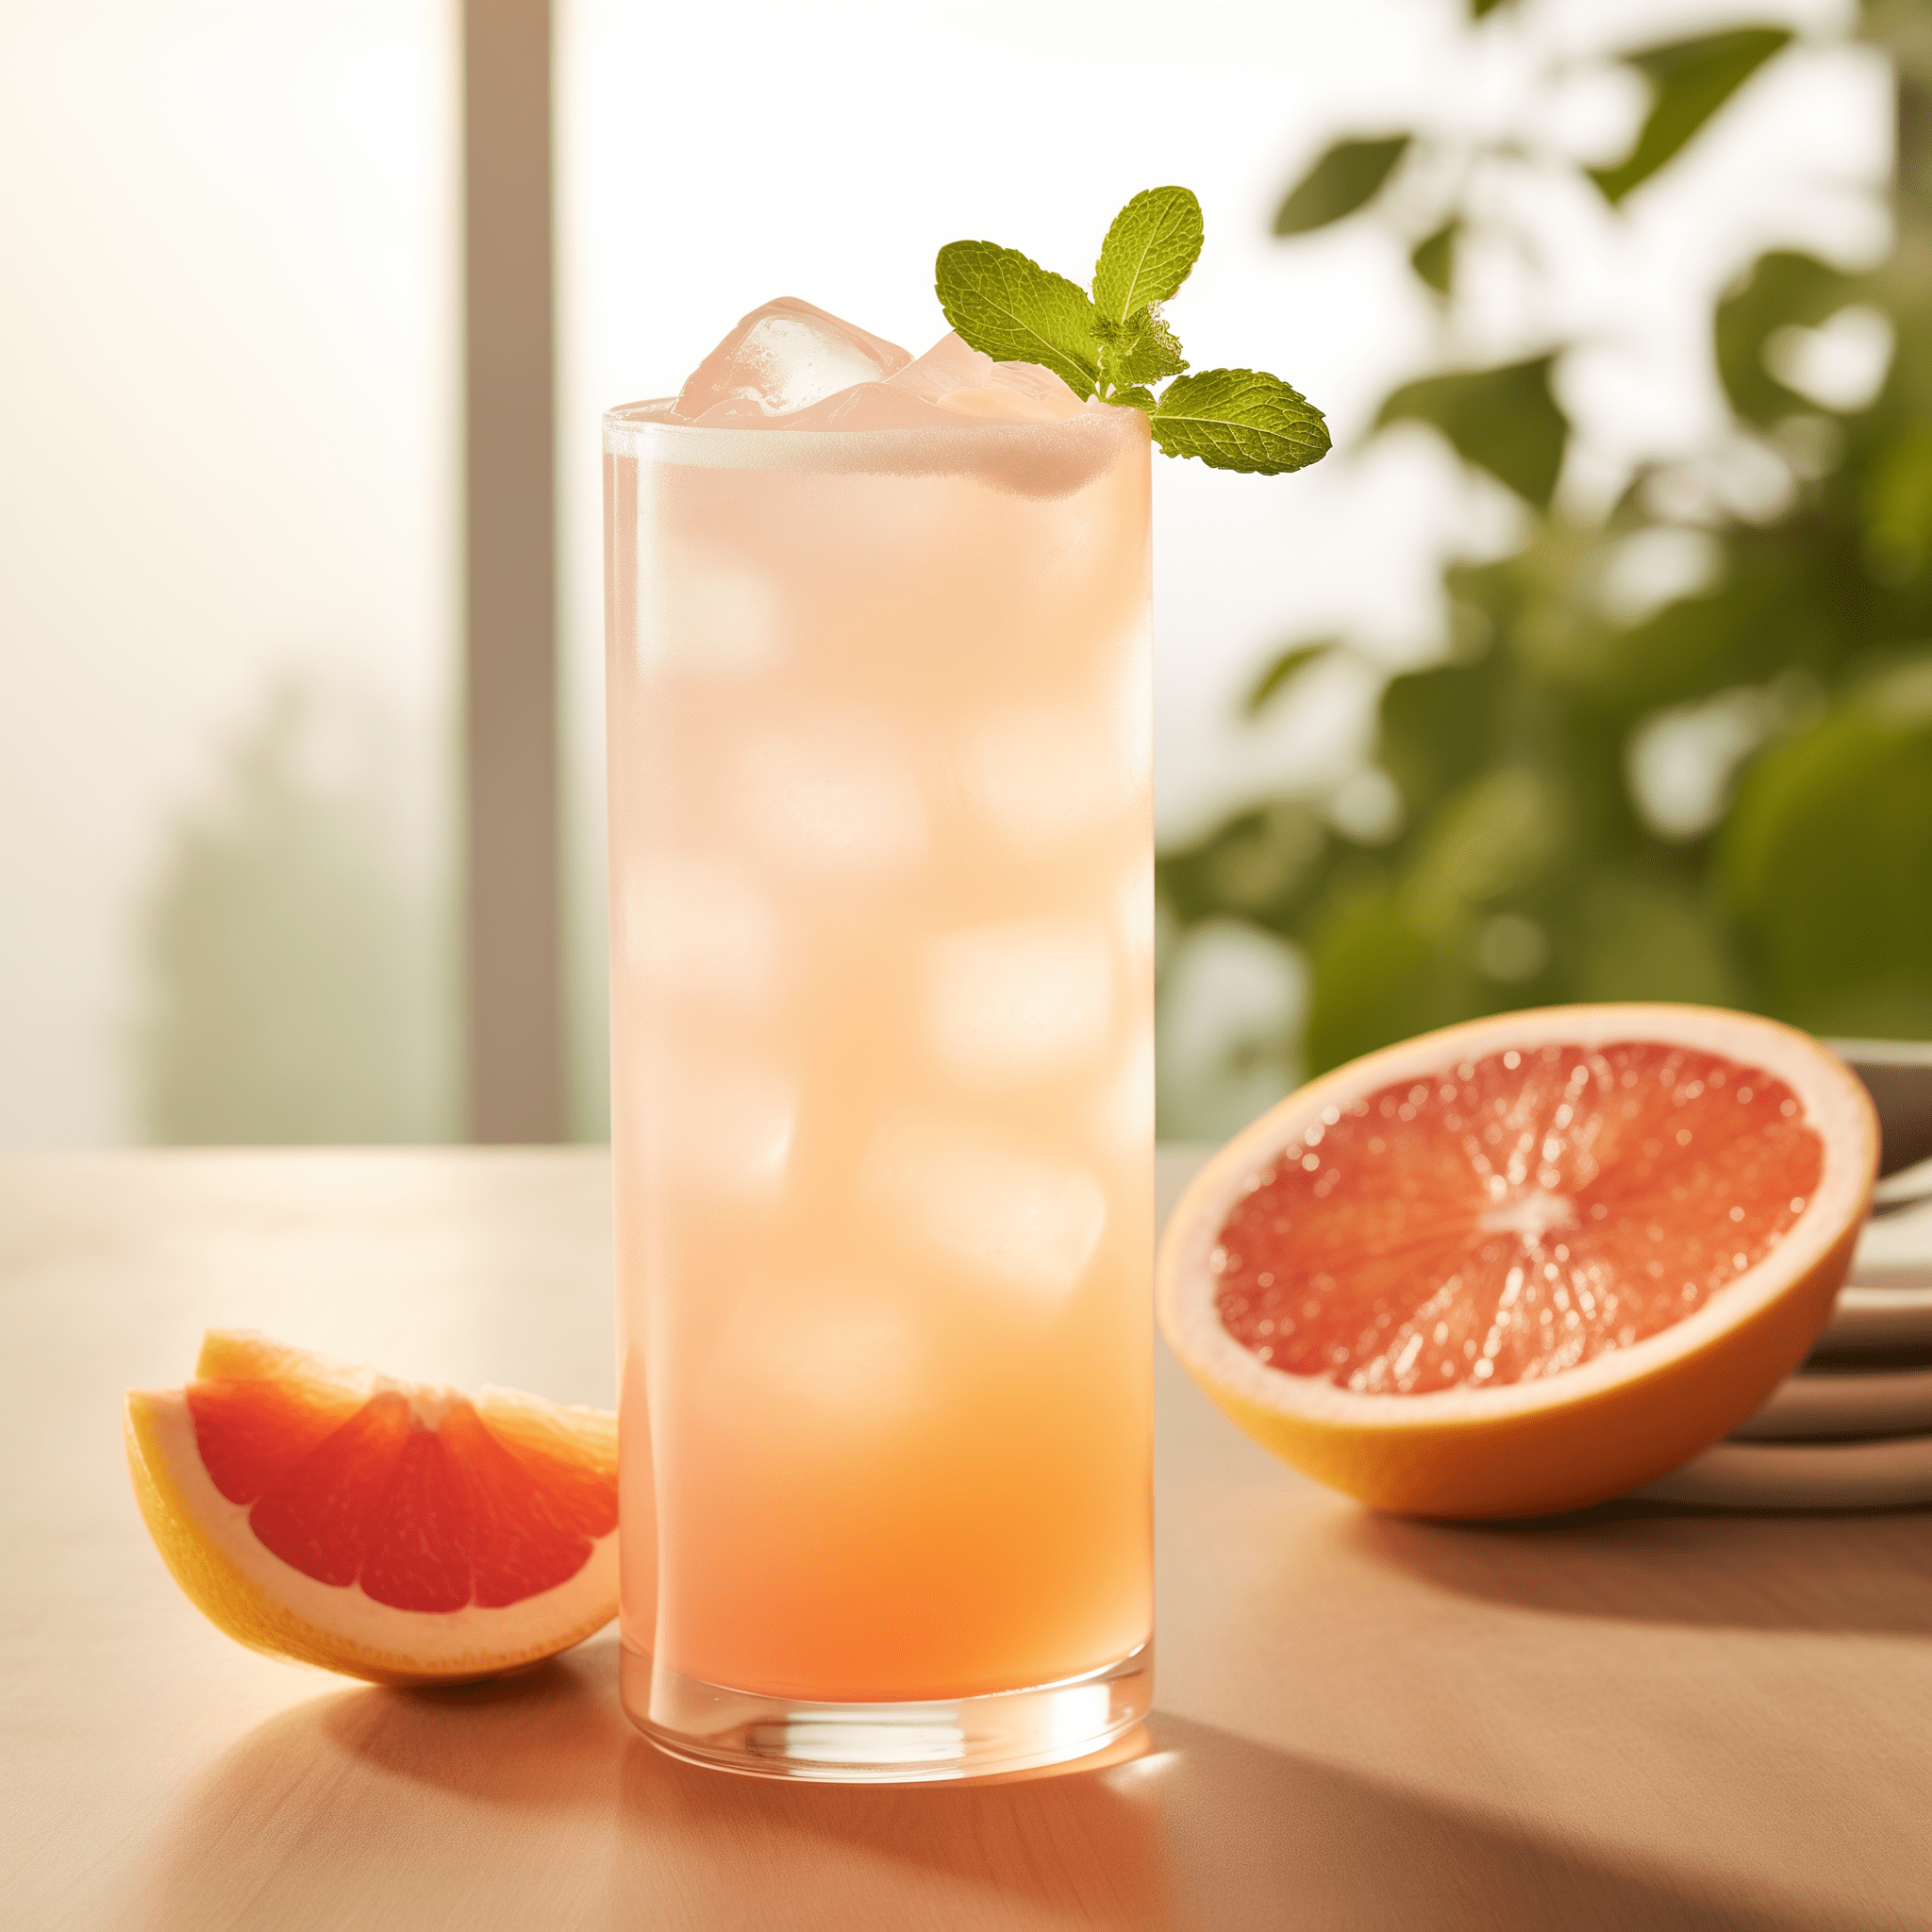 Skinny Dip Cocktail Recipe - The Skinny Dip offers a delightful balance of sweet and tangy flavors, with the grapefruit soda providing a zesty punch. The sherbet adds a creamy texture and a hint of sweetness, while the vodka gives it a smooth and slightly strong finish.